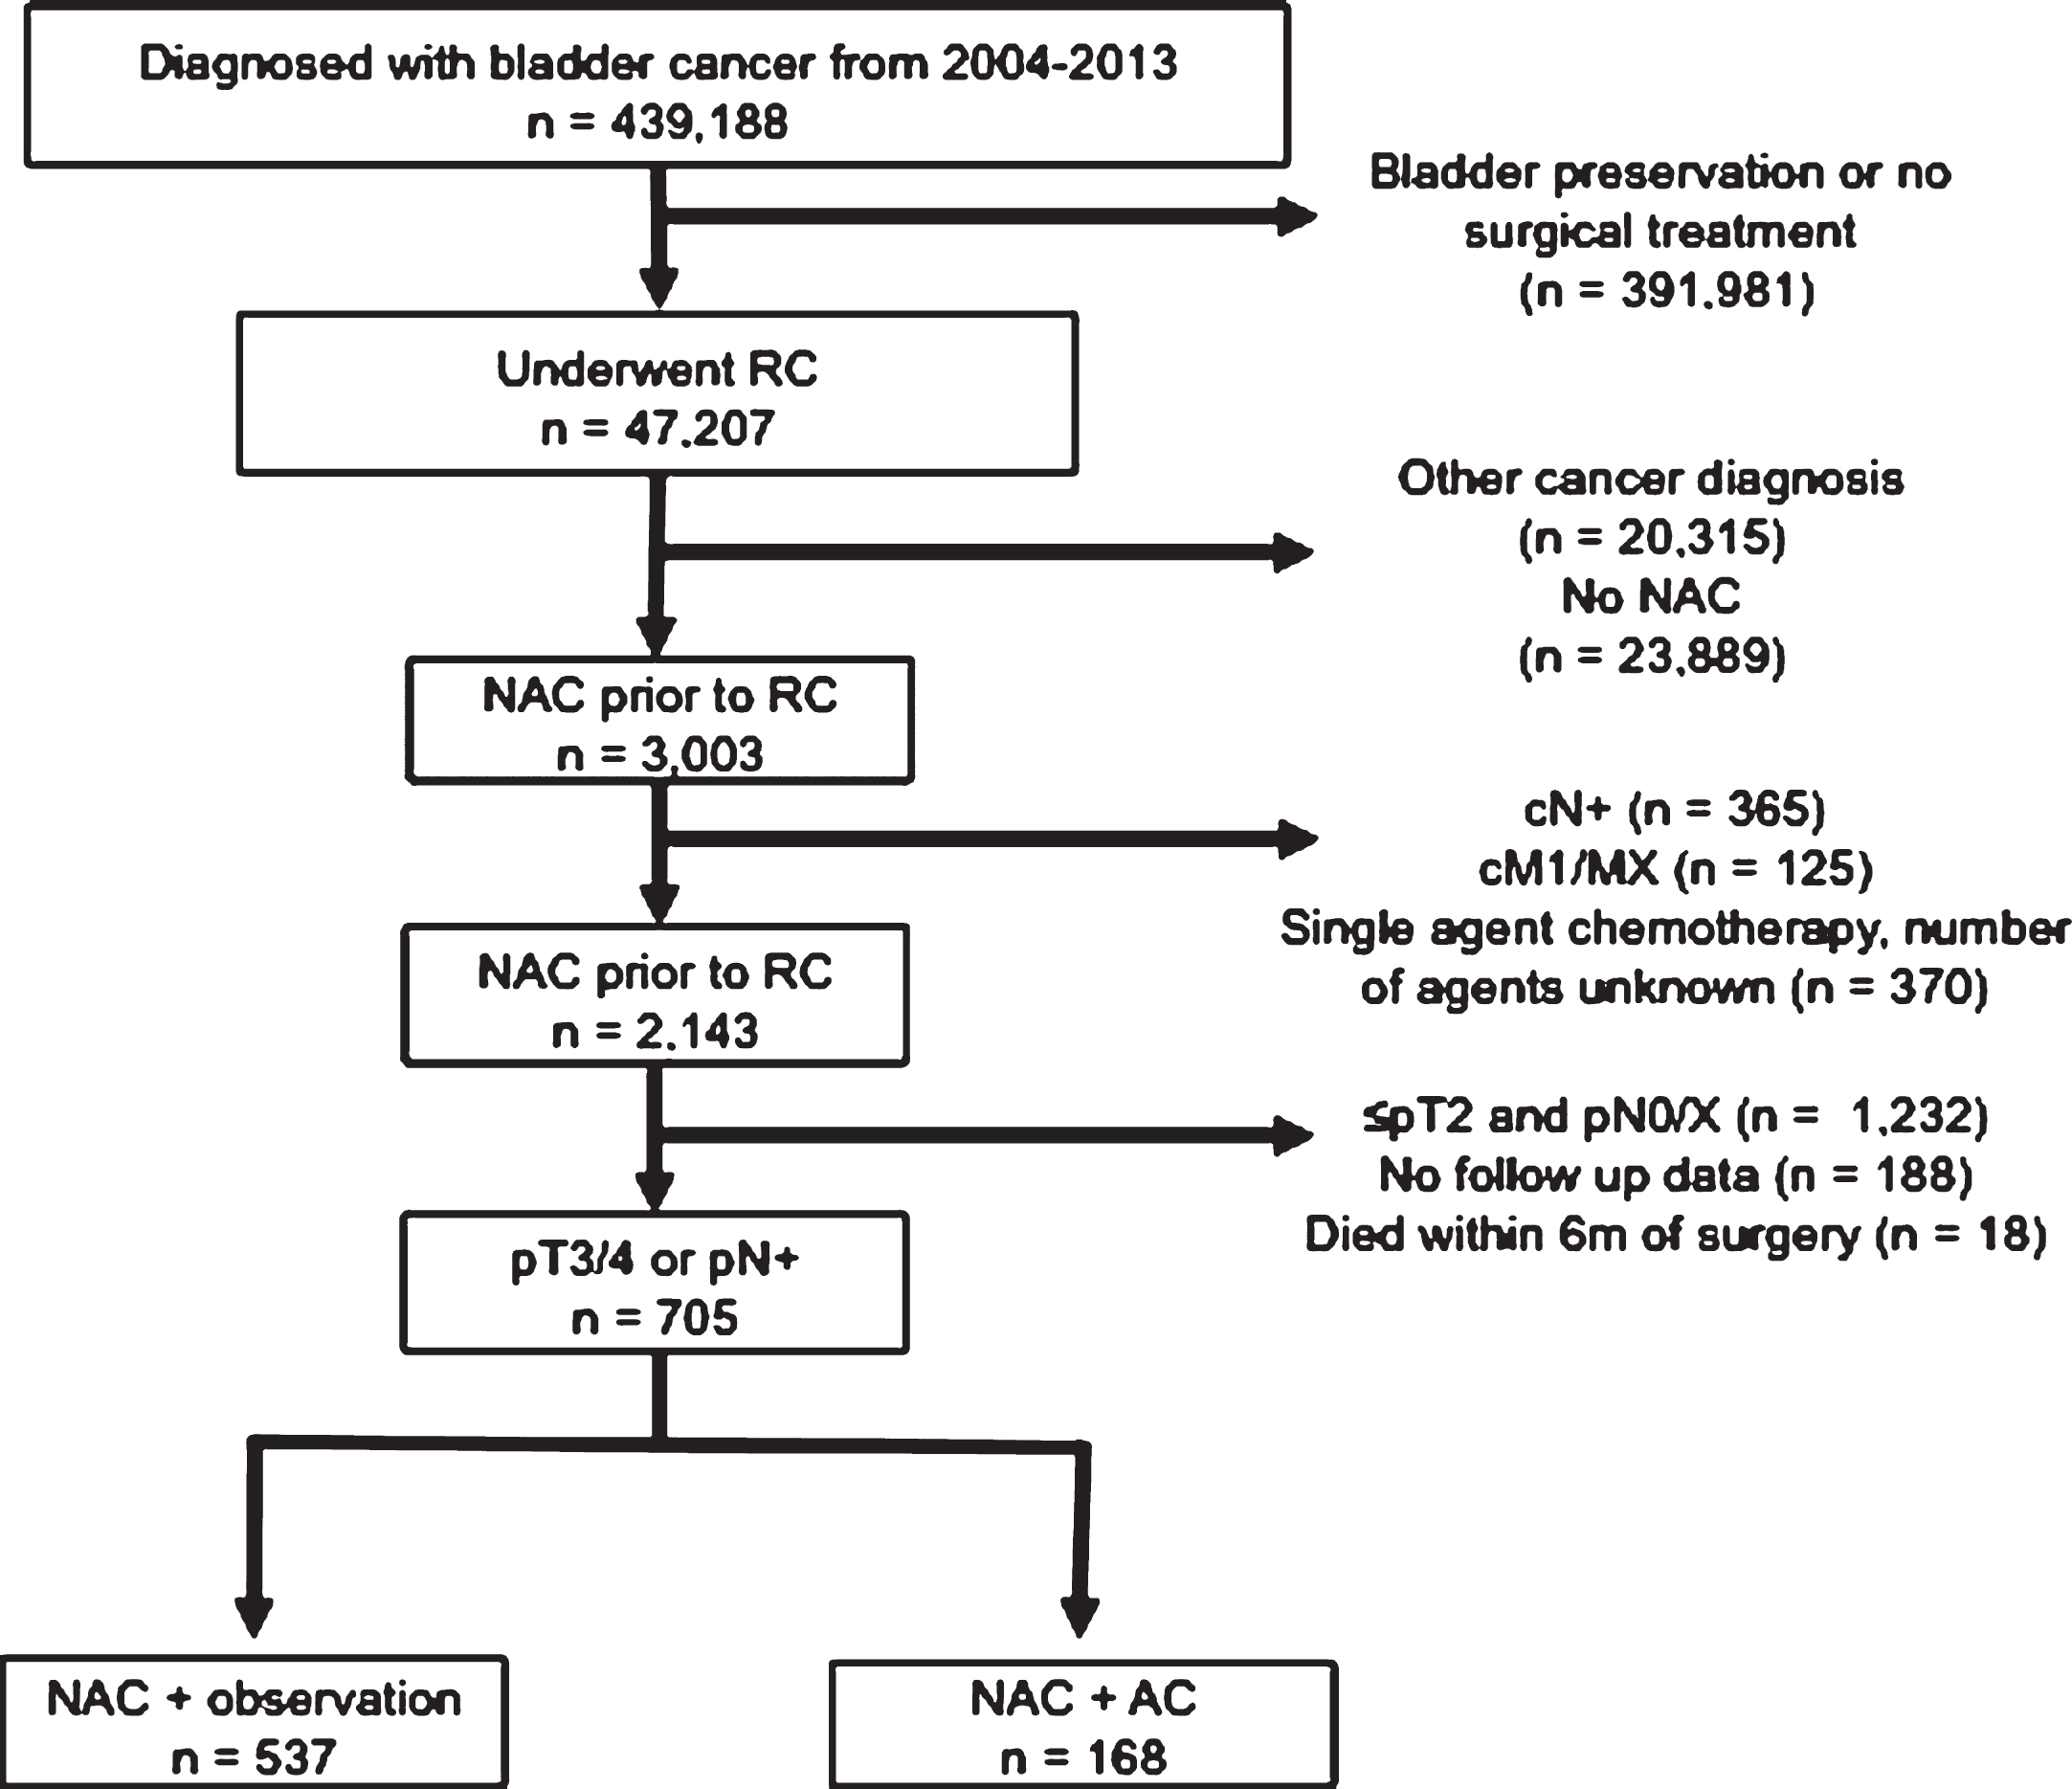 Inclusion and exclusion criteria of pT3/4 or pN+ patients who underwent NAC and RC from the 2004–2013 NCDB.